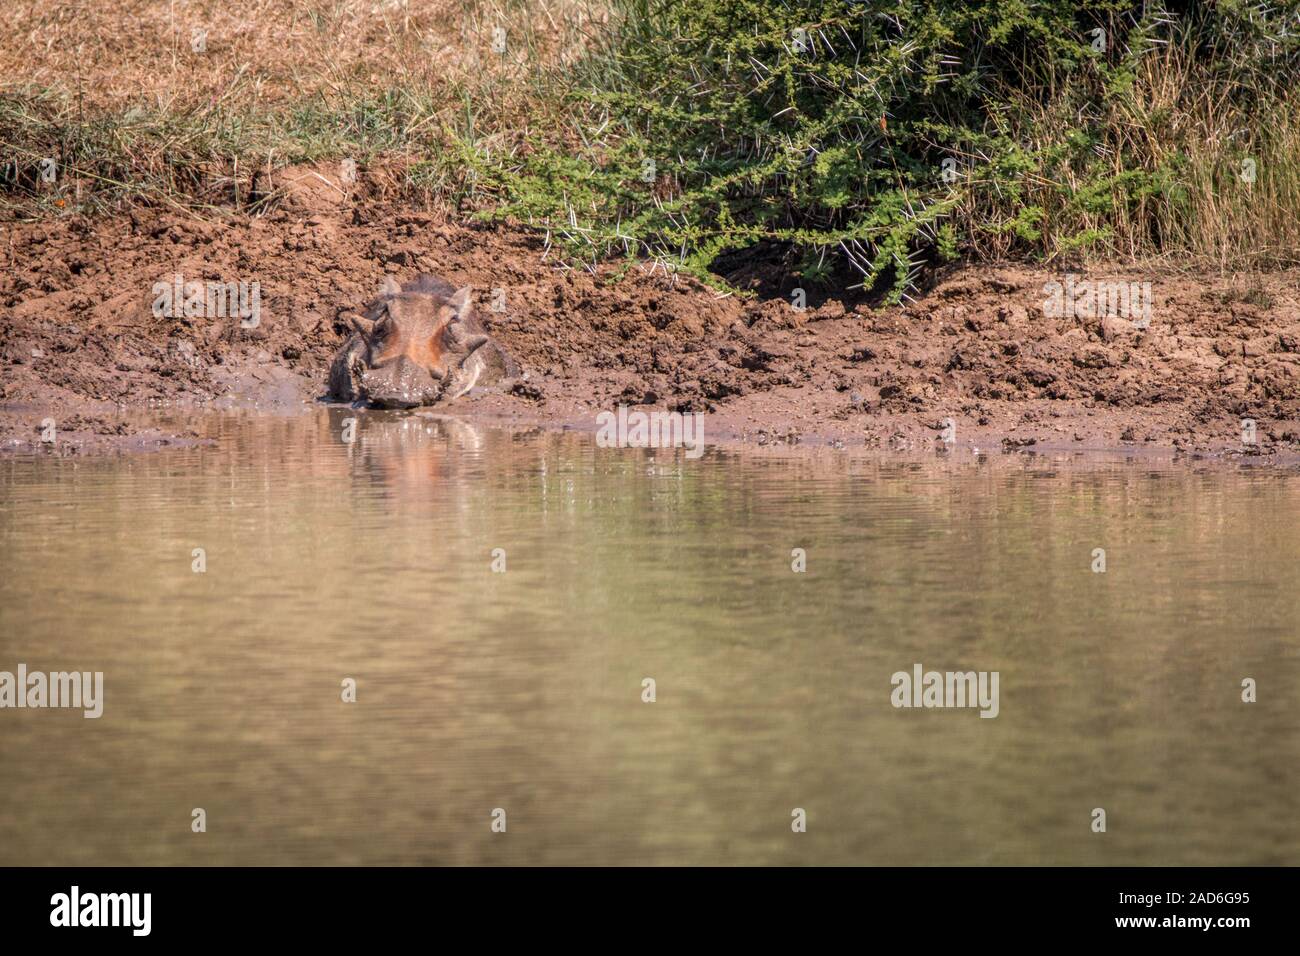 A Warthog relaxing next to the water. Stock Photo